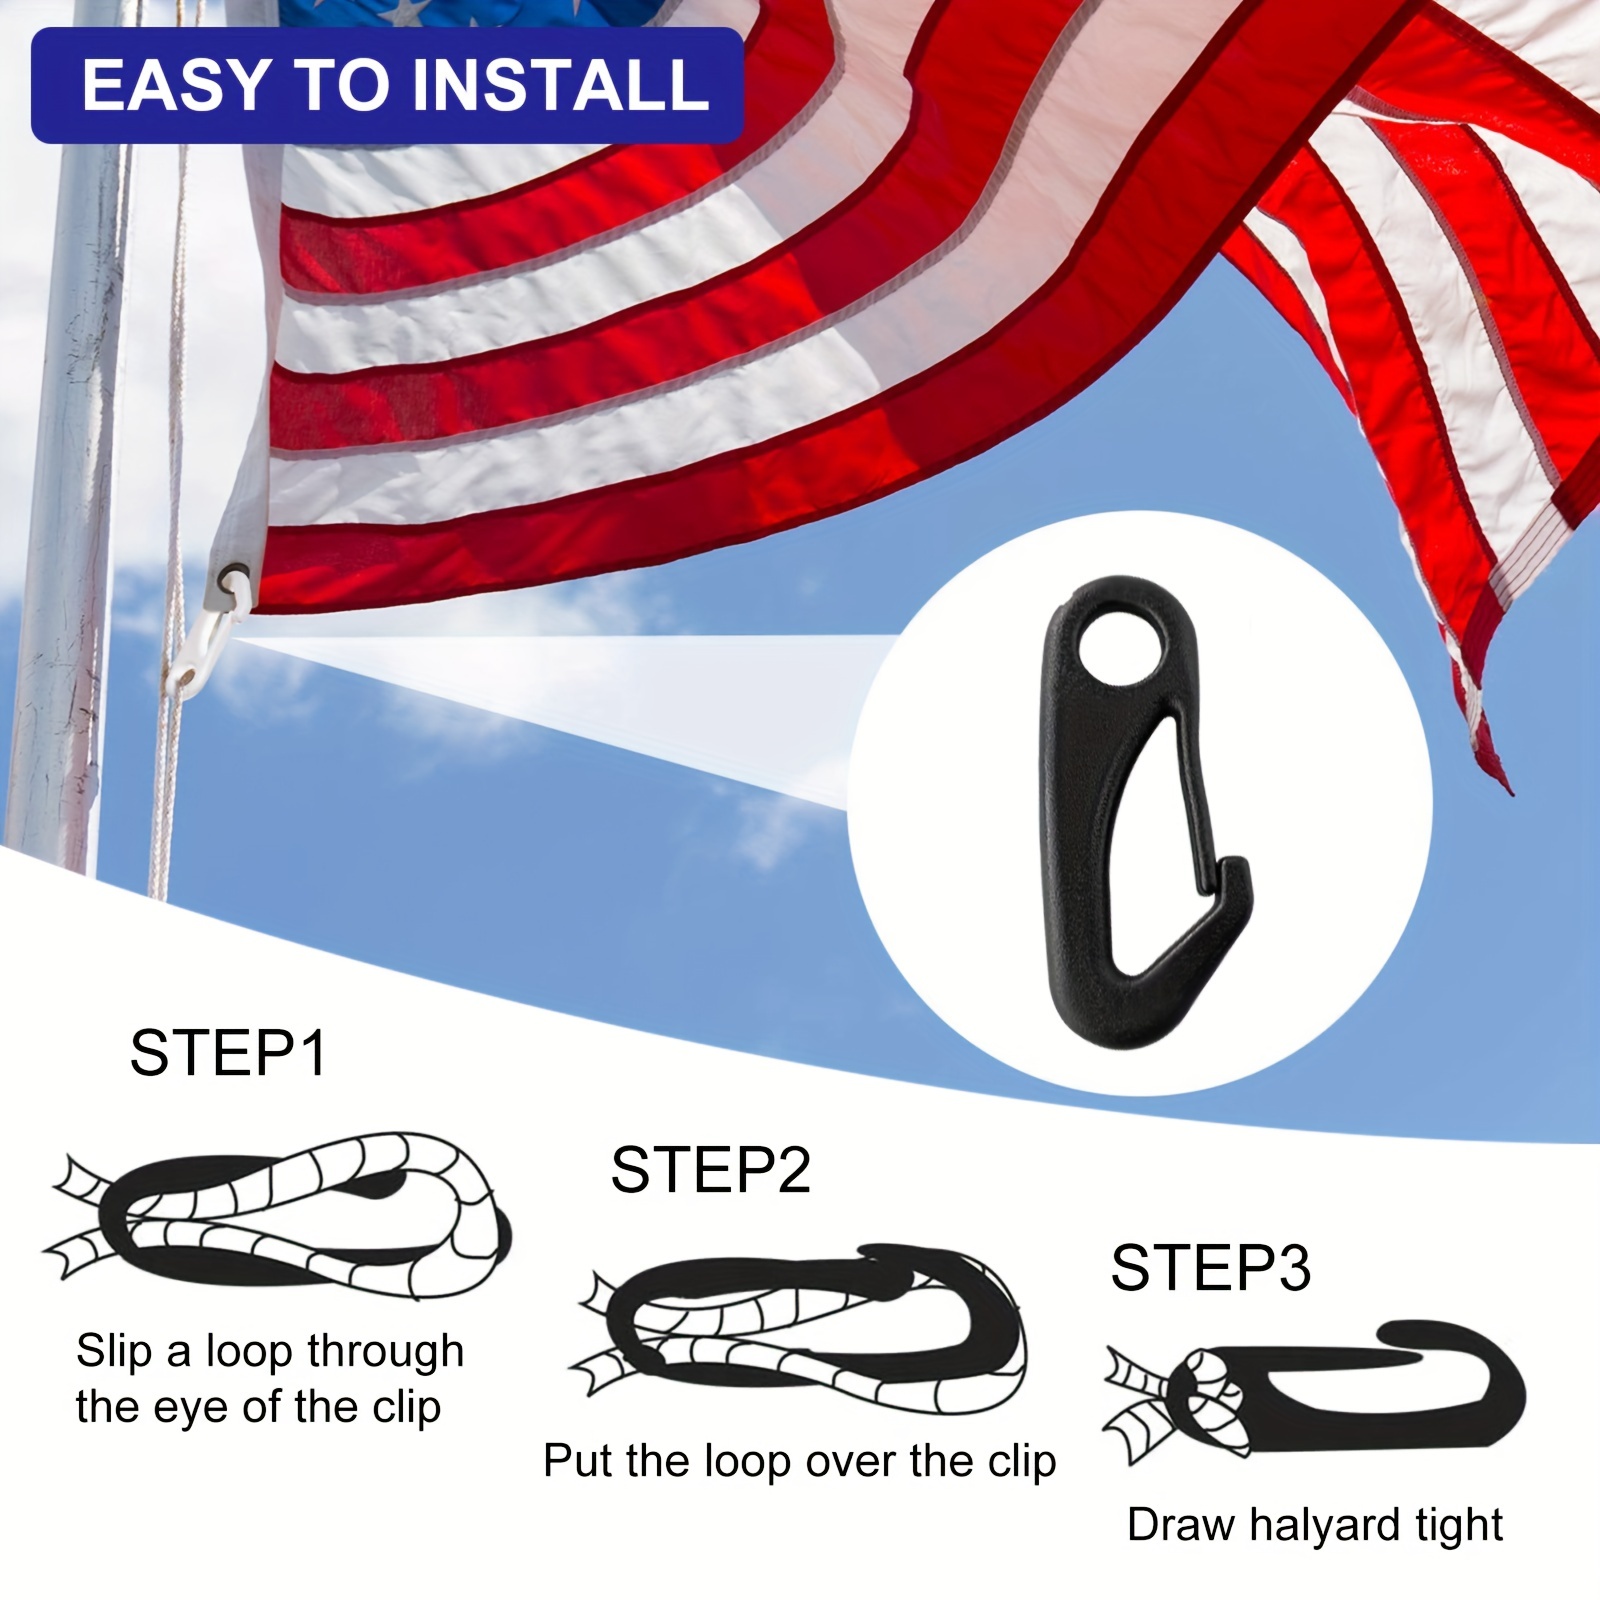 Flag Pole Rope Kit 50Ft x 1/4 Diameter Halyard Rope with 4 Pcs Plastic  Snap Hooks Clips Outdoor Flagpole Hardware Accessories Camping Rope